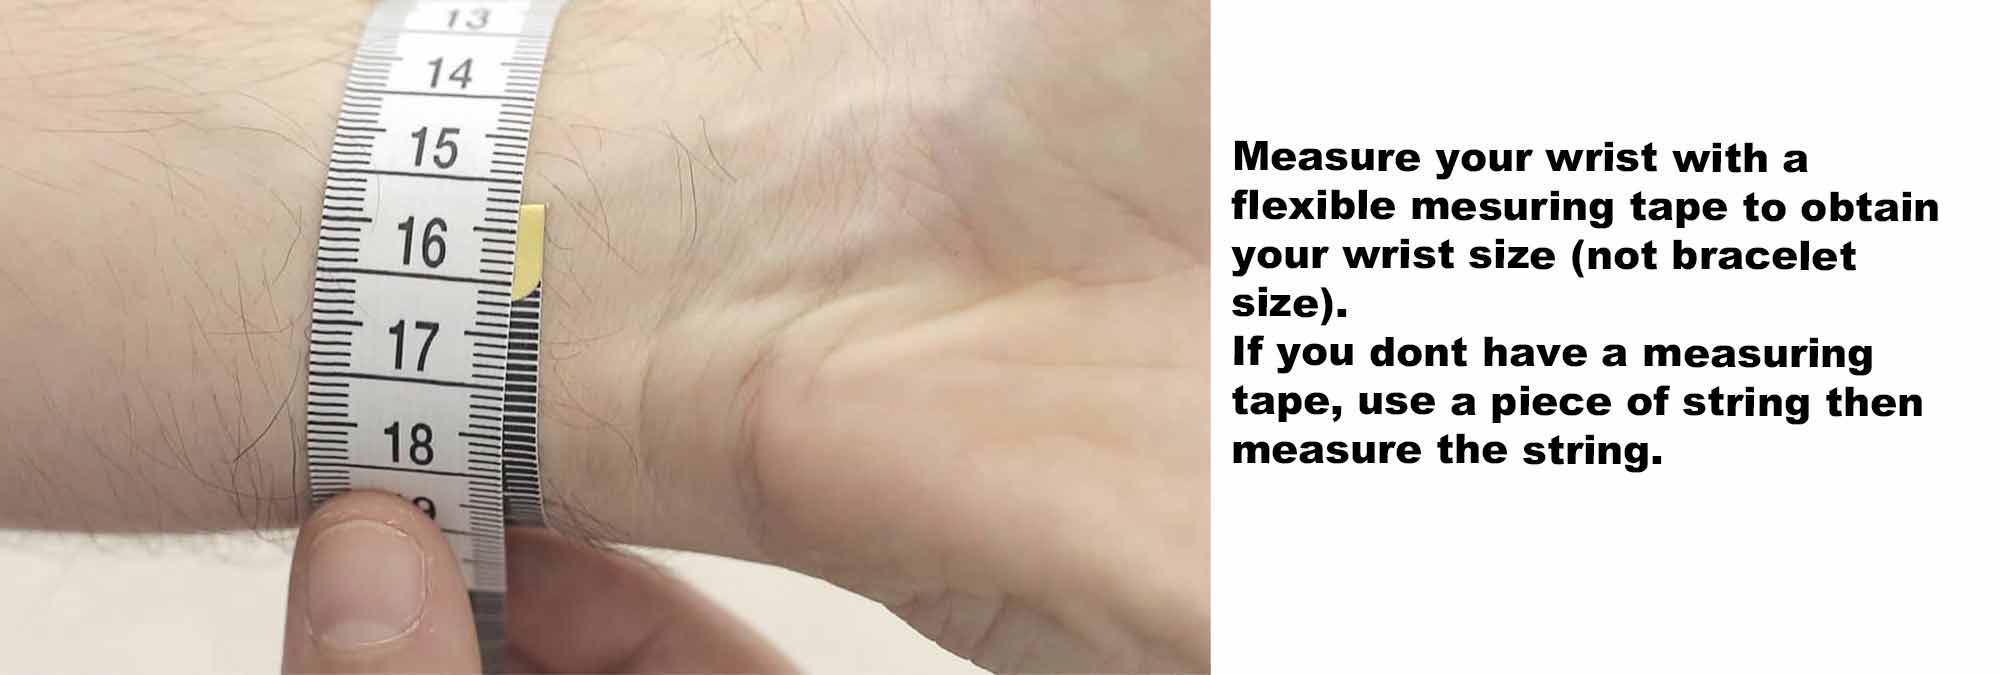 Bracelet Guide: How to Measure Your Wrist Size for a Bracelet